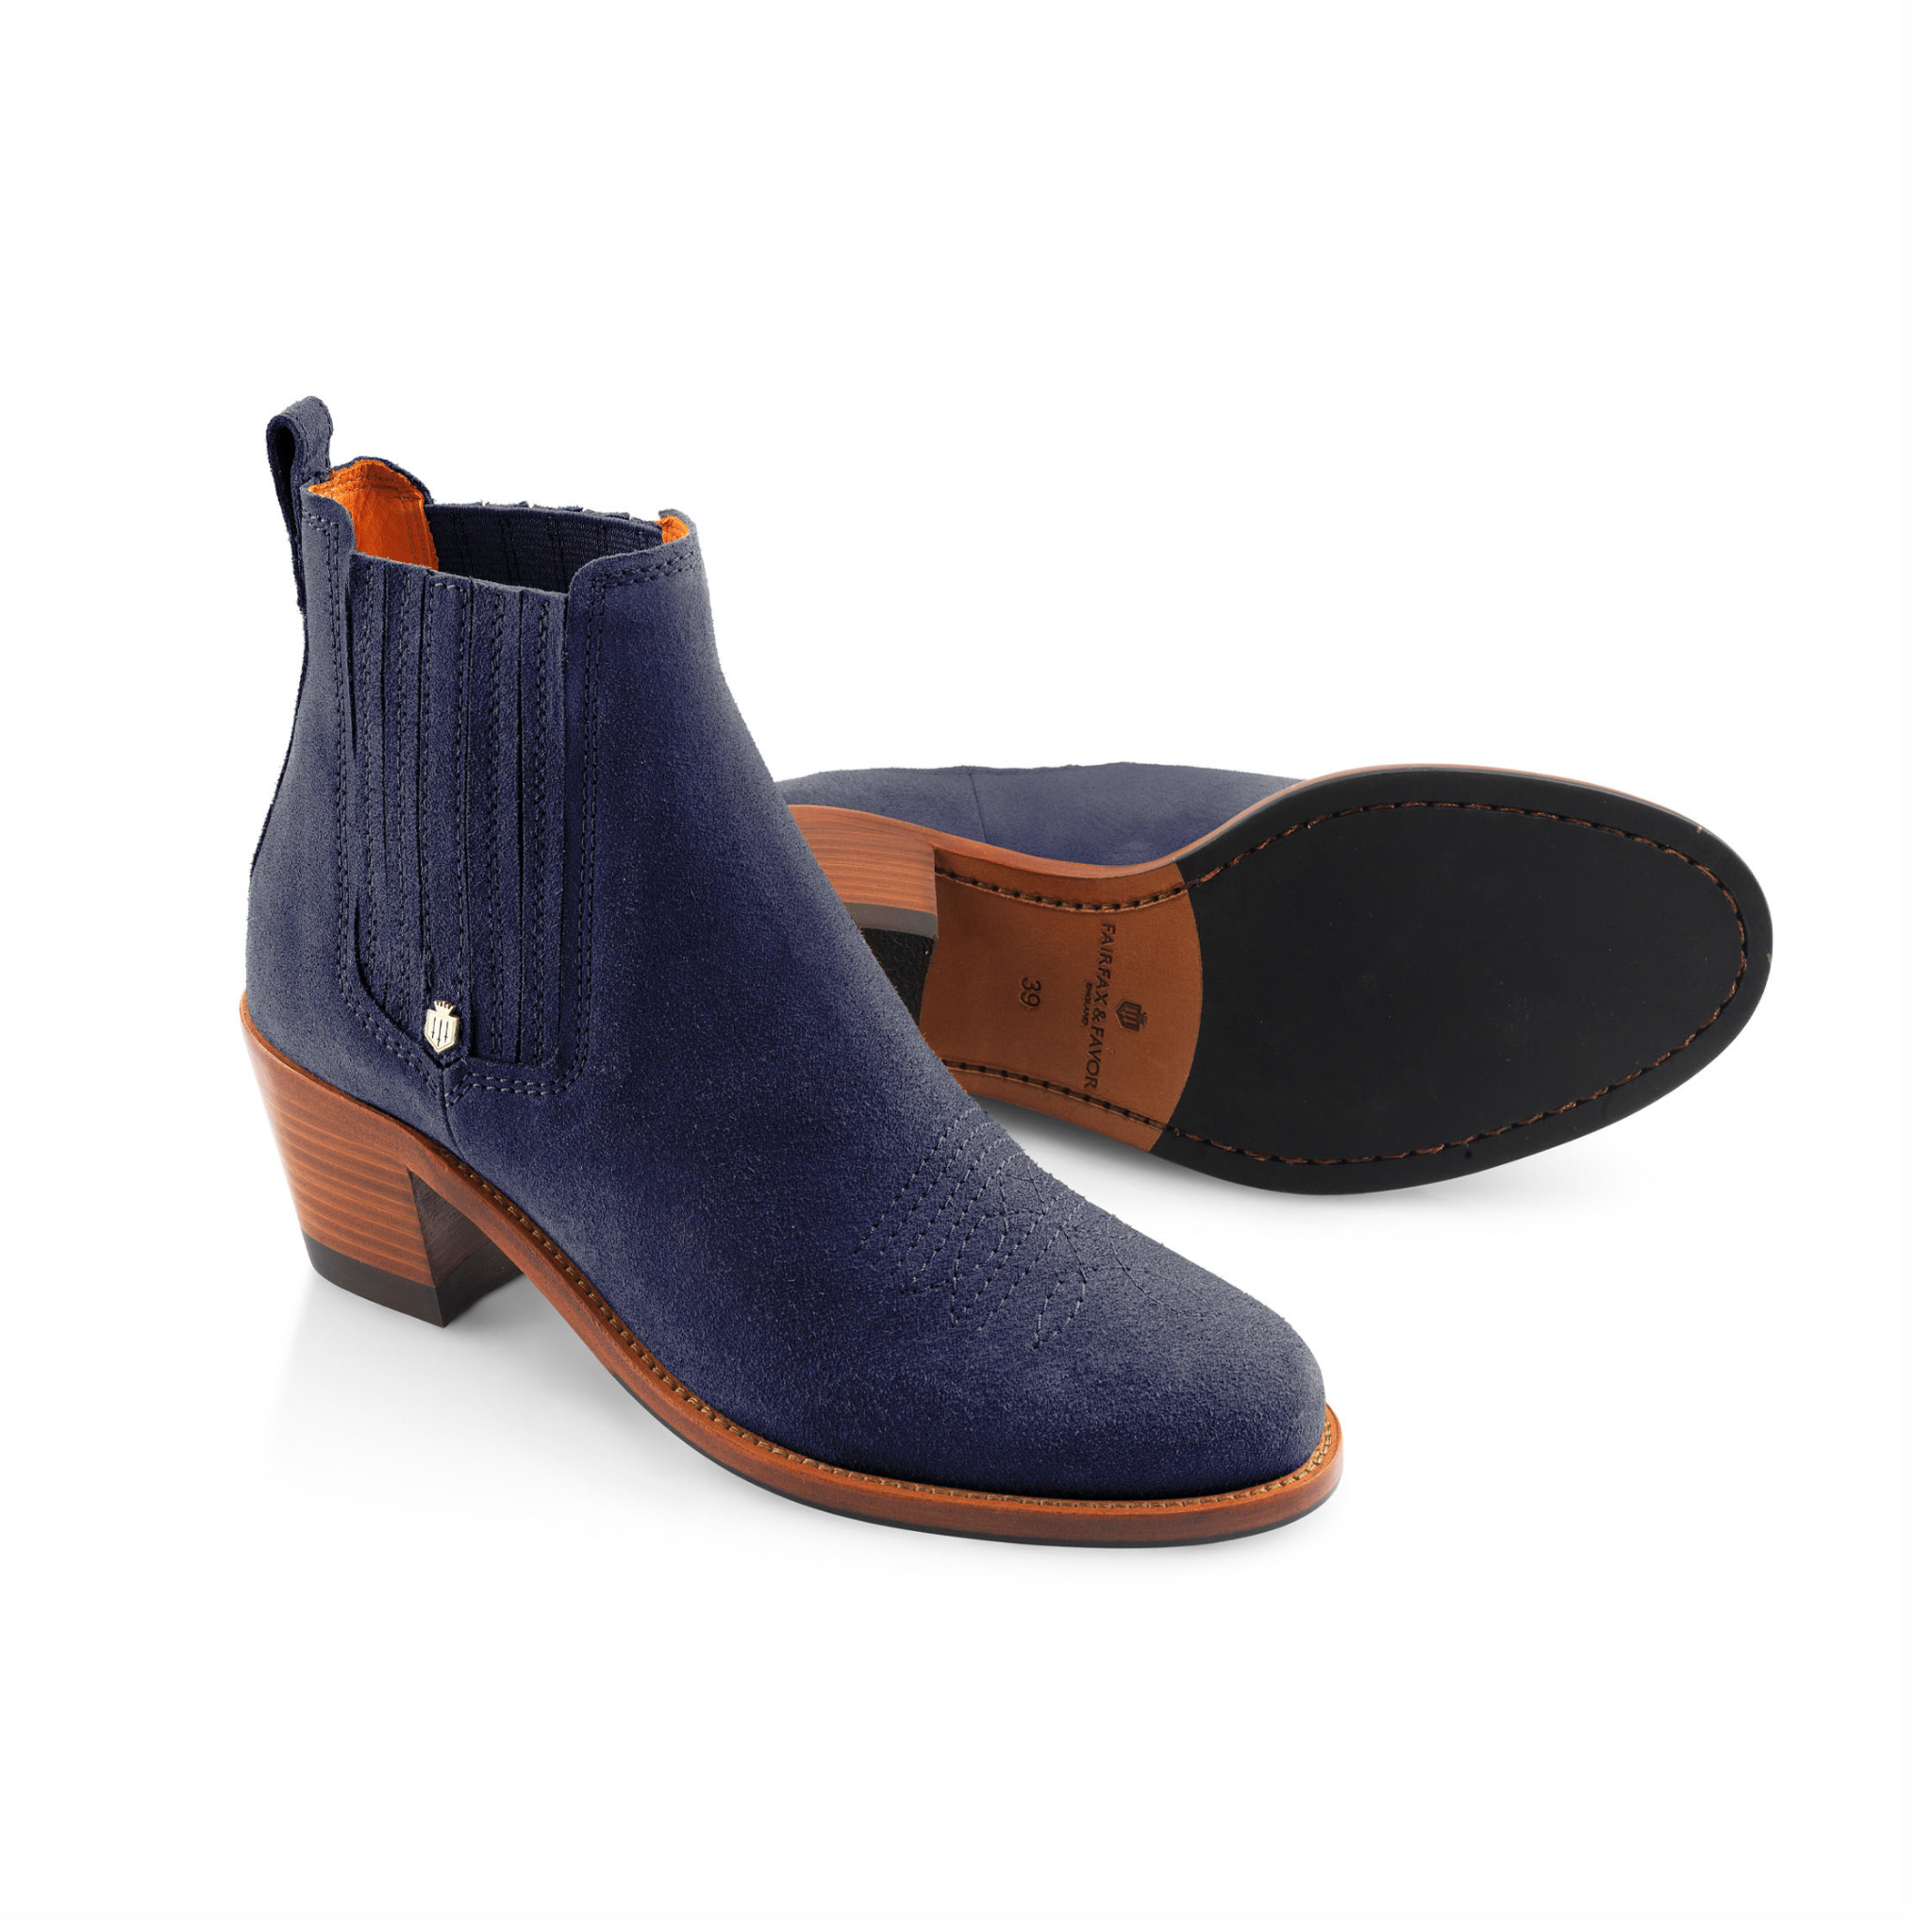 Rockingham Ankle Boot Ink Suede